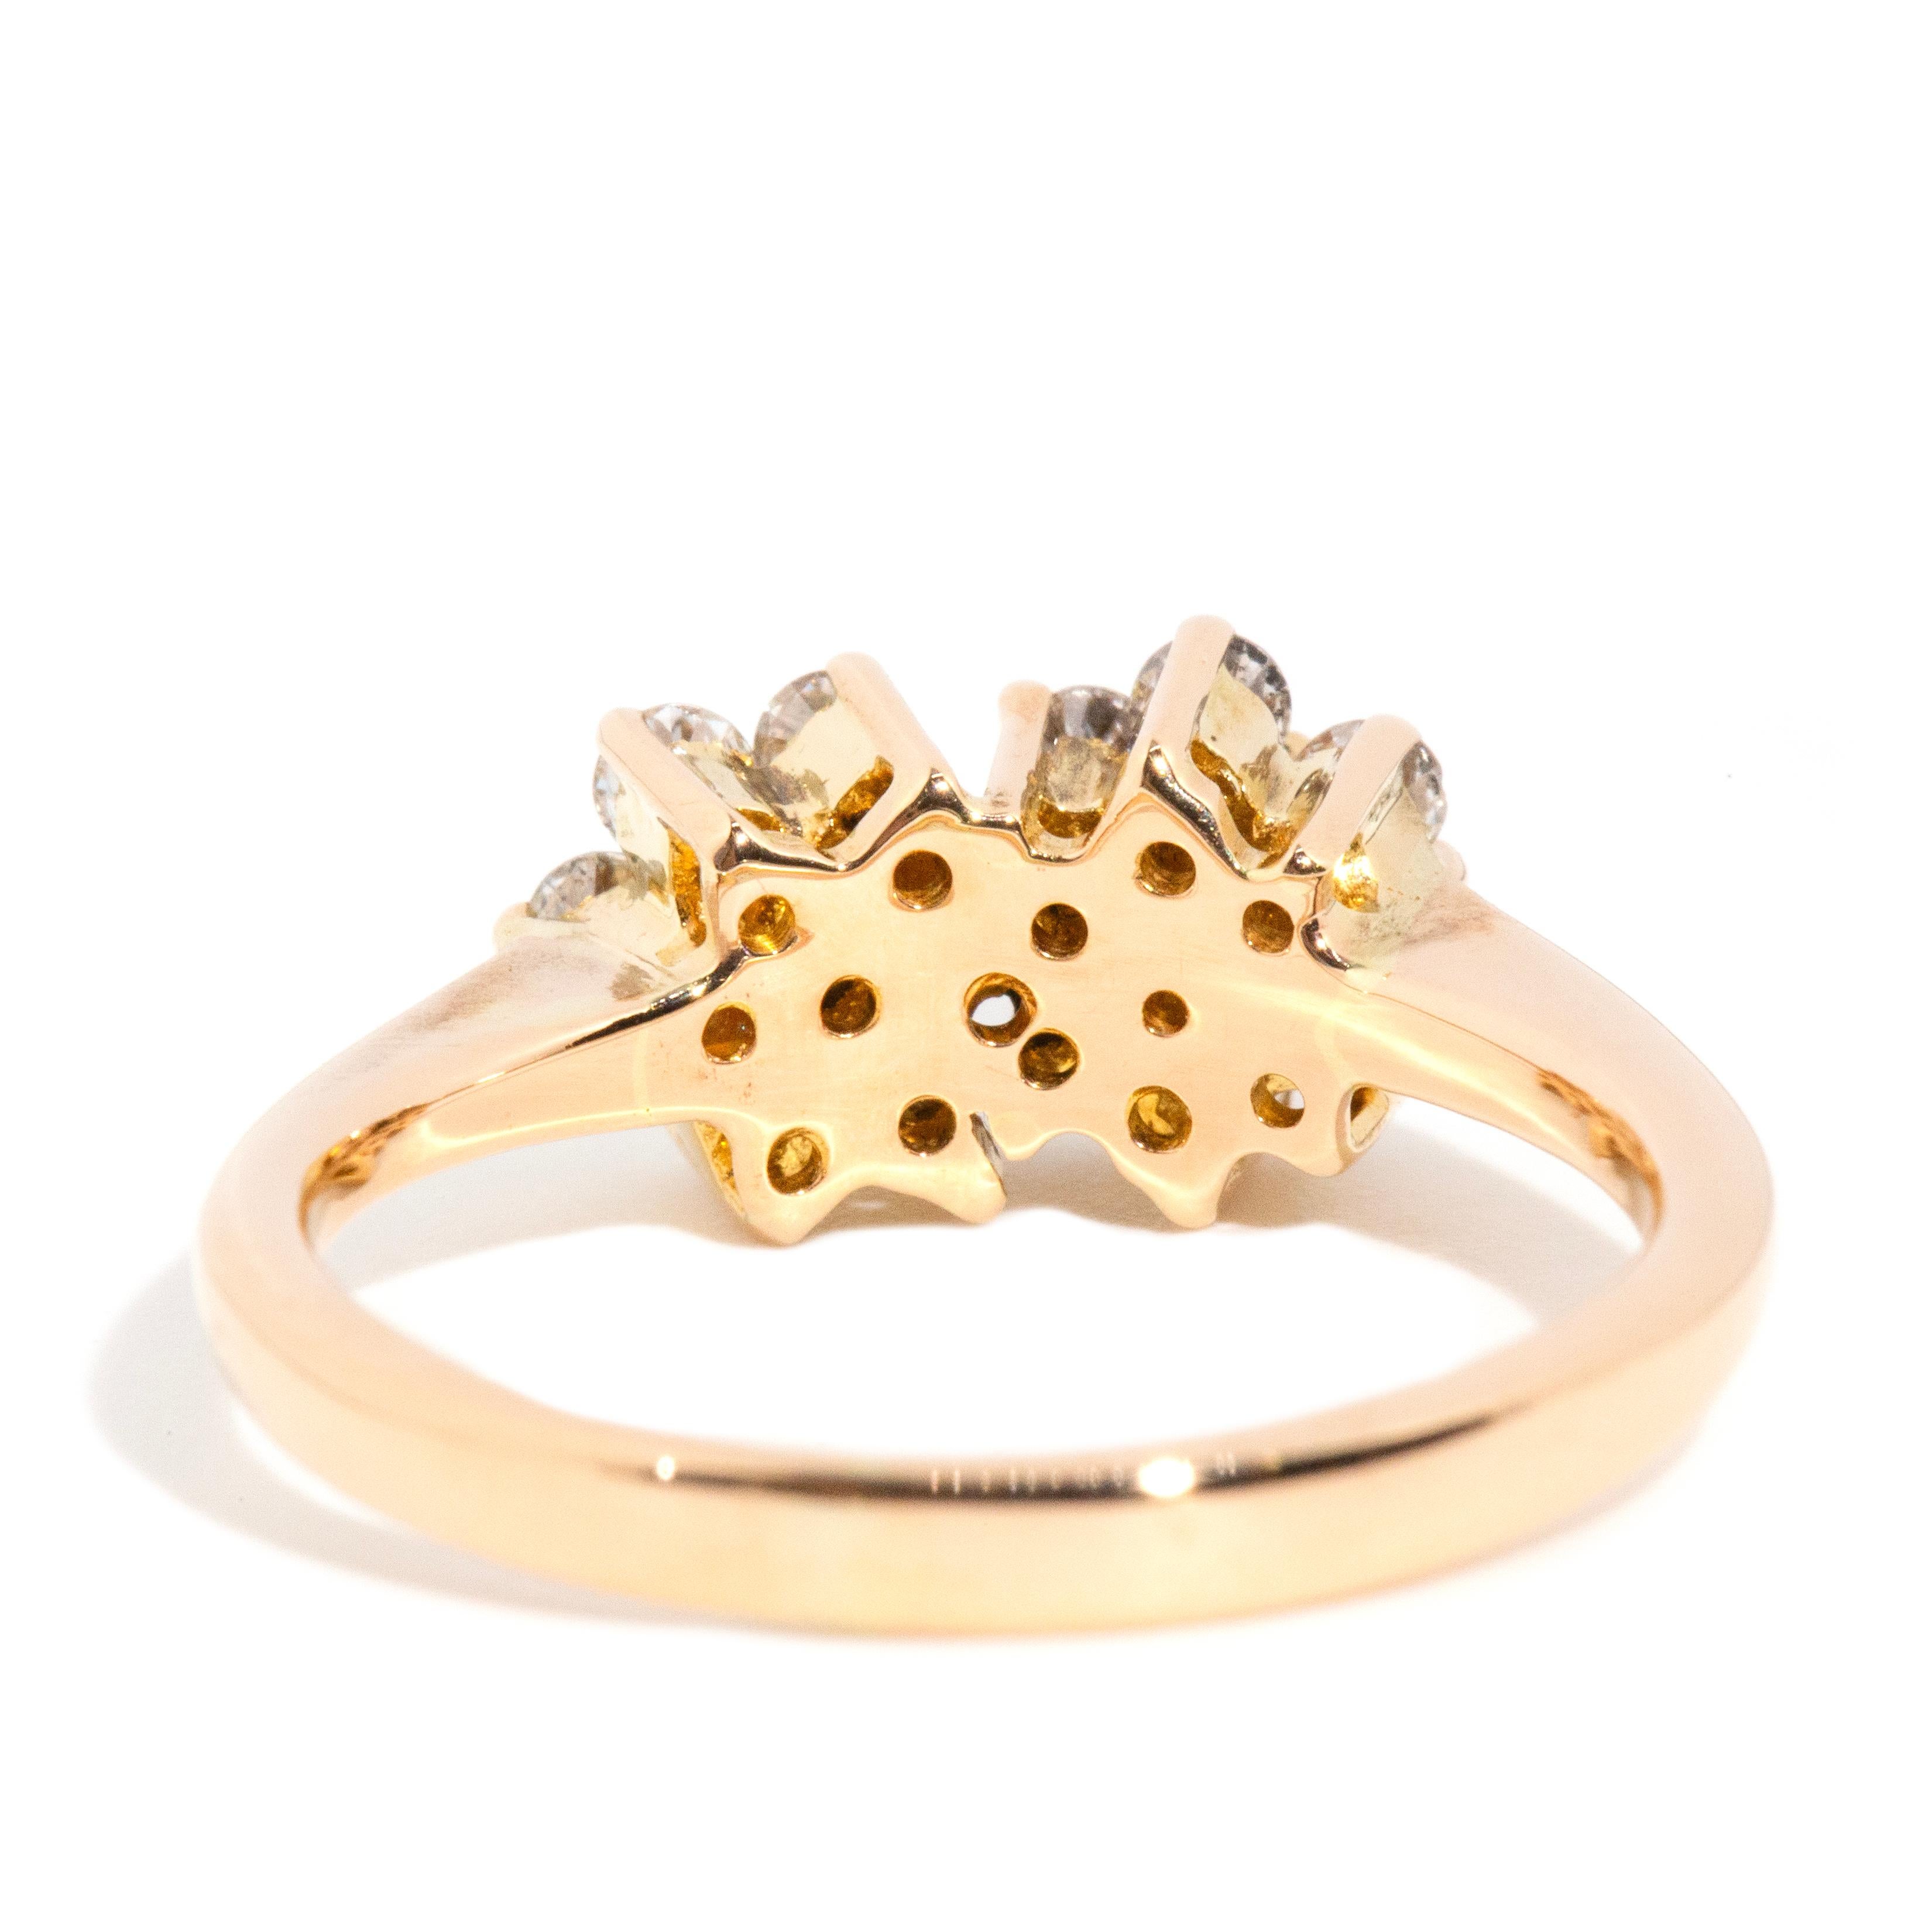 Vintage Circa 1980s 0.50 Carat Twin Cluster Diamond Ring 18 Carat Yellow Gold For Sale 2